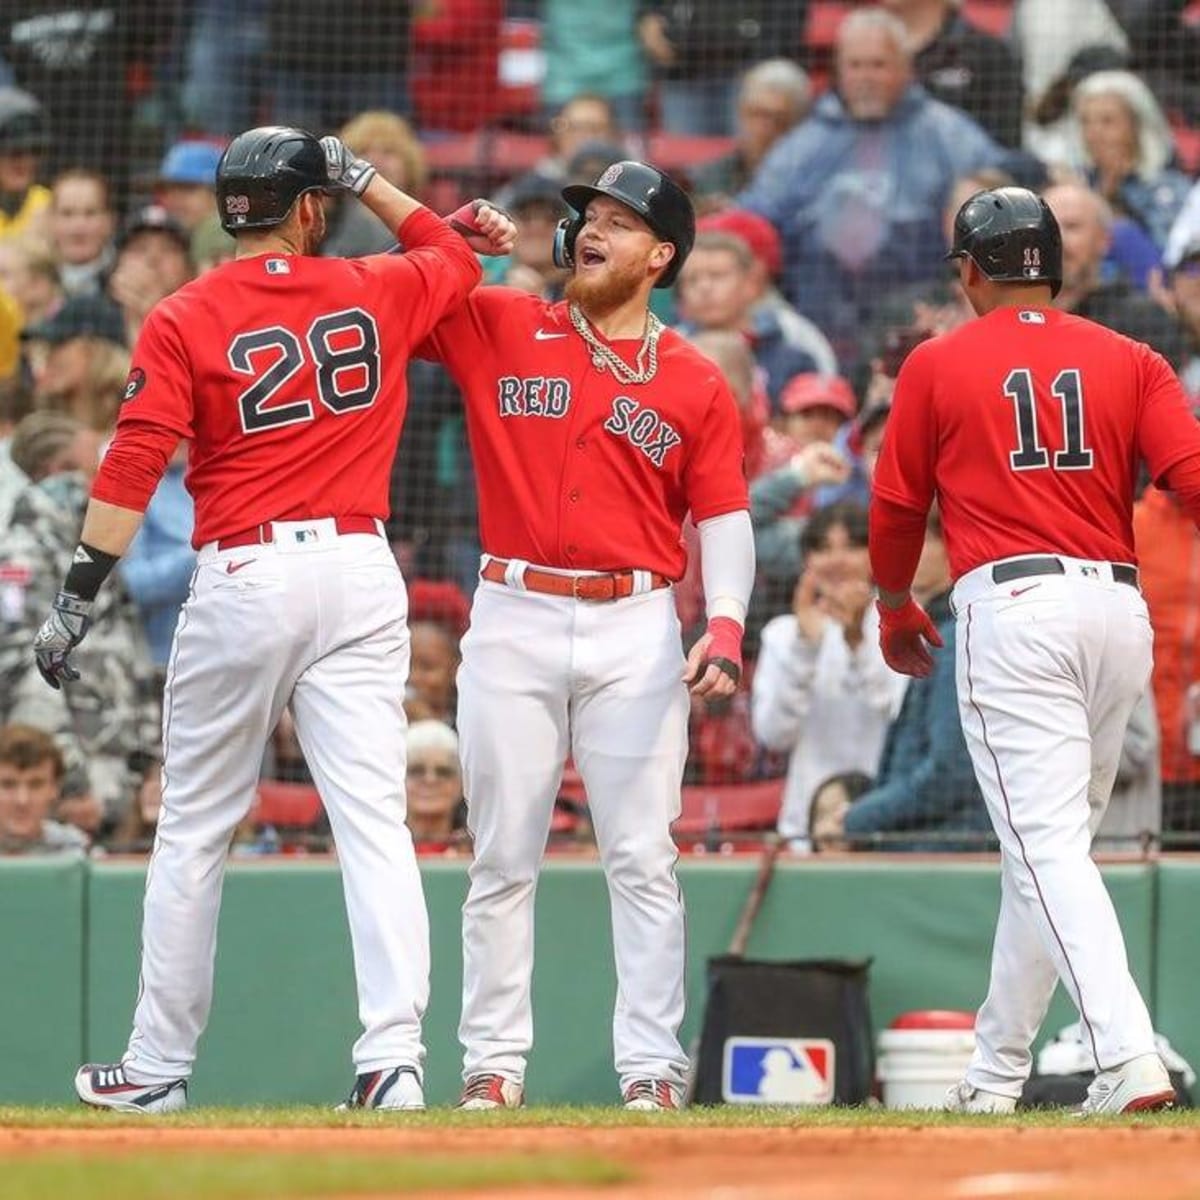 Red Sox fall in finale to Rays, 4-2